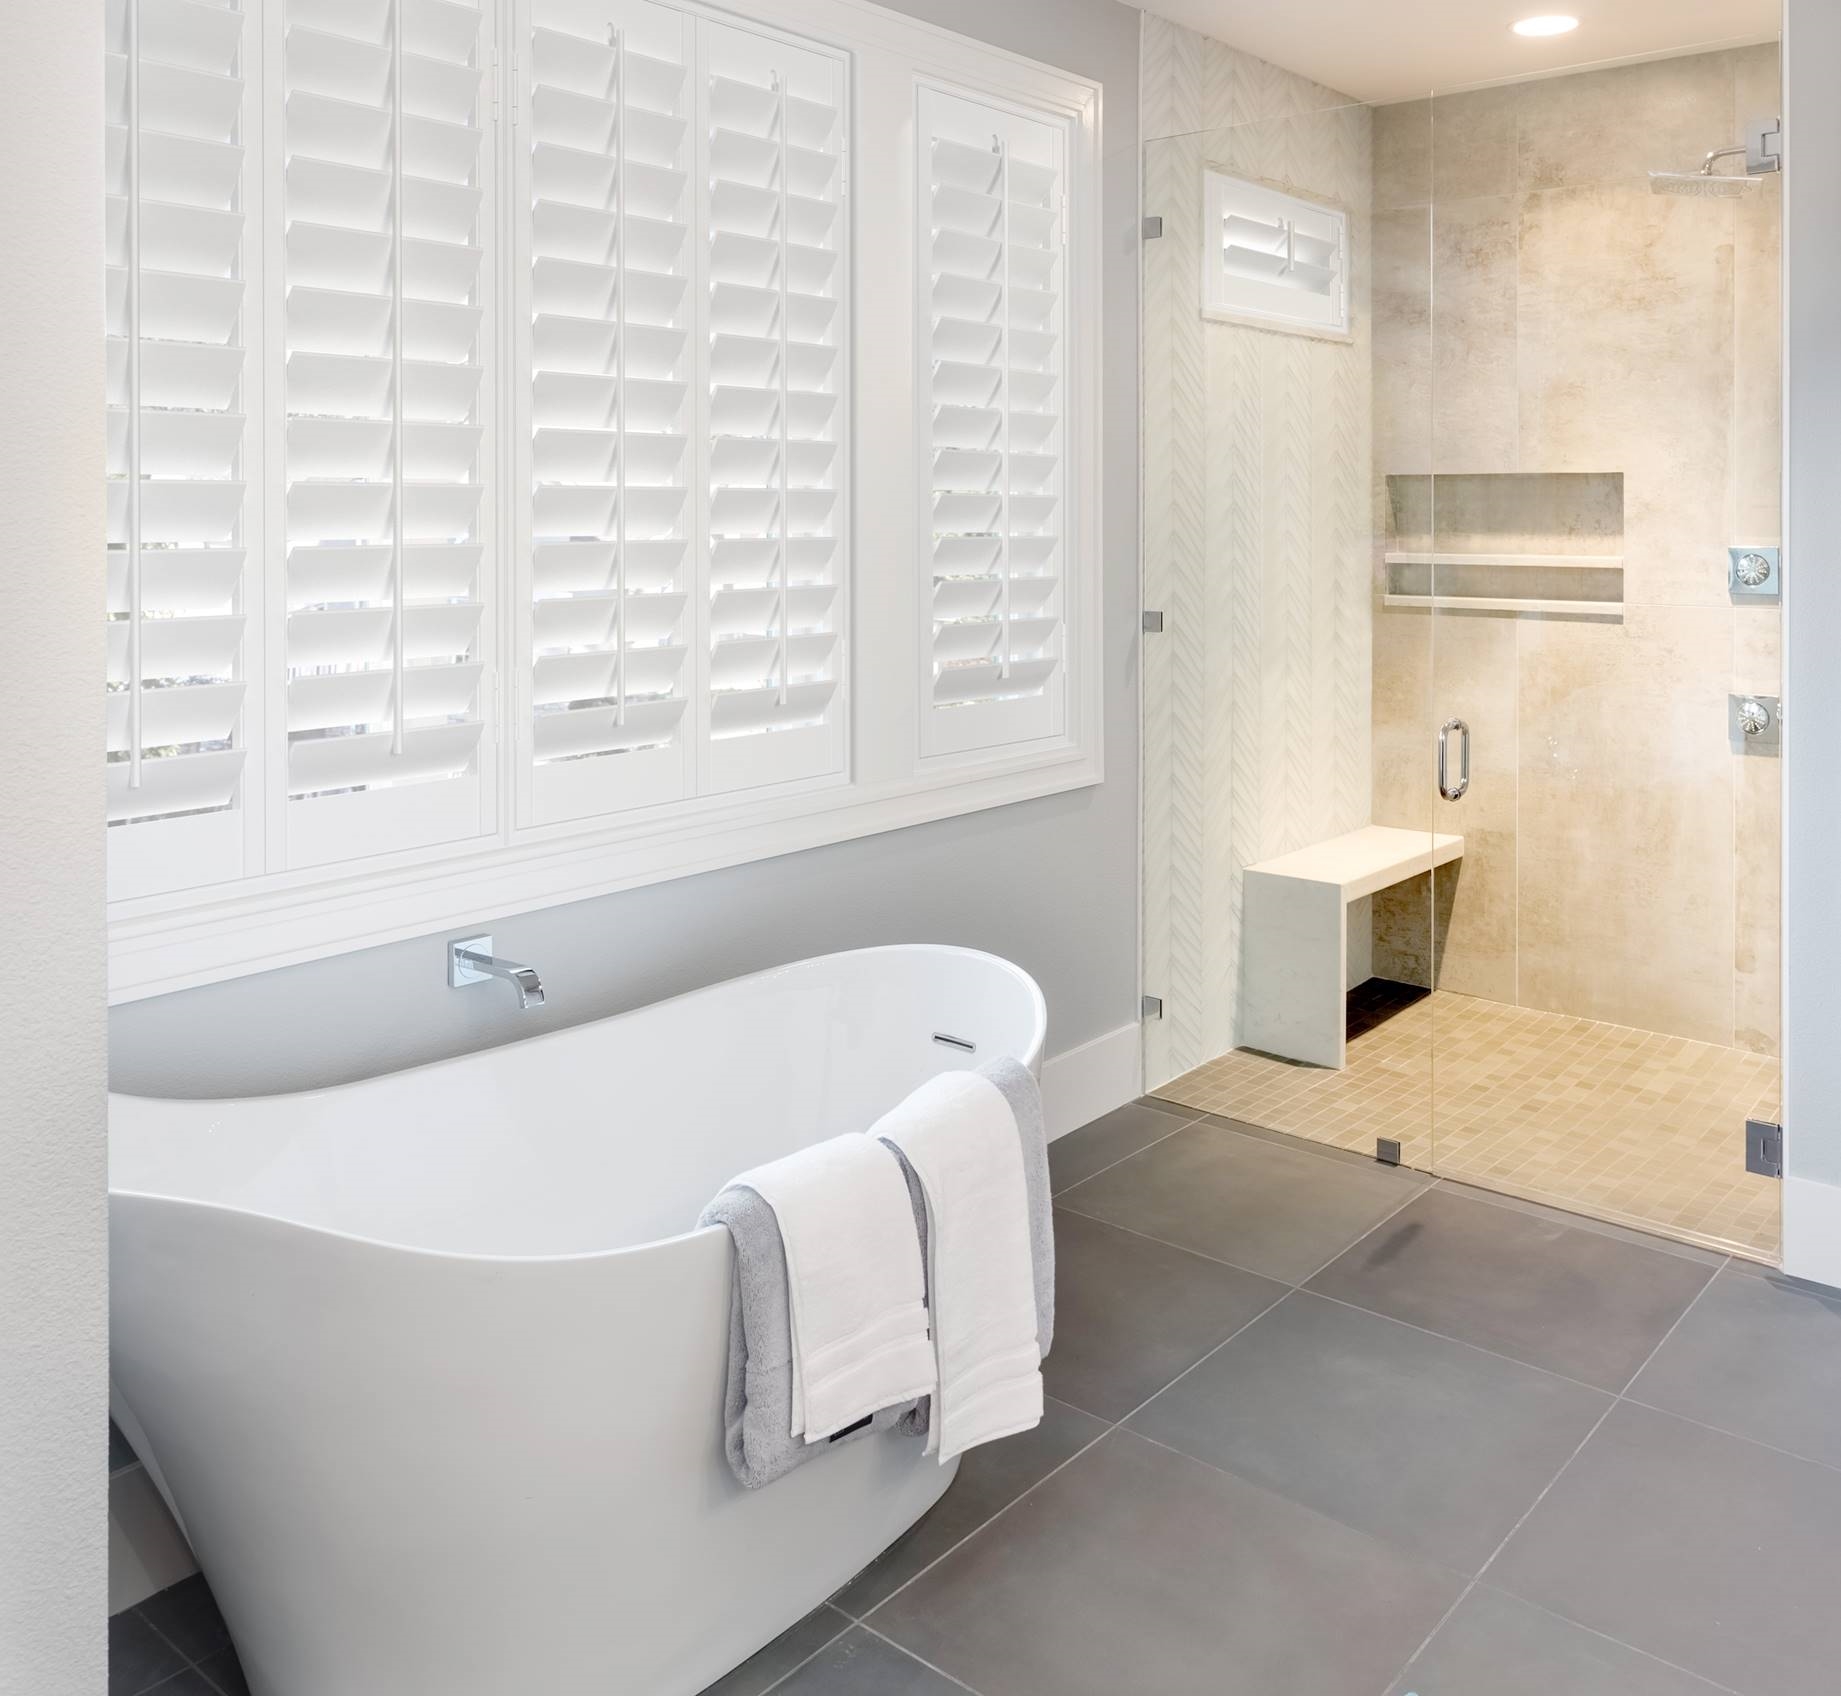 Being moisture resistant , Polywood Shutters have the innate ability to take on humidity like a champ, thus are an ideal window treatment for bathrooms.
